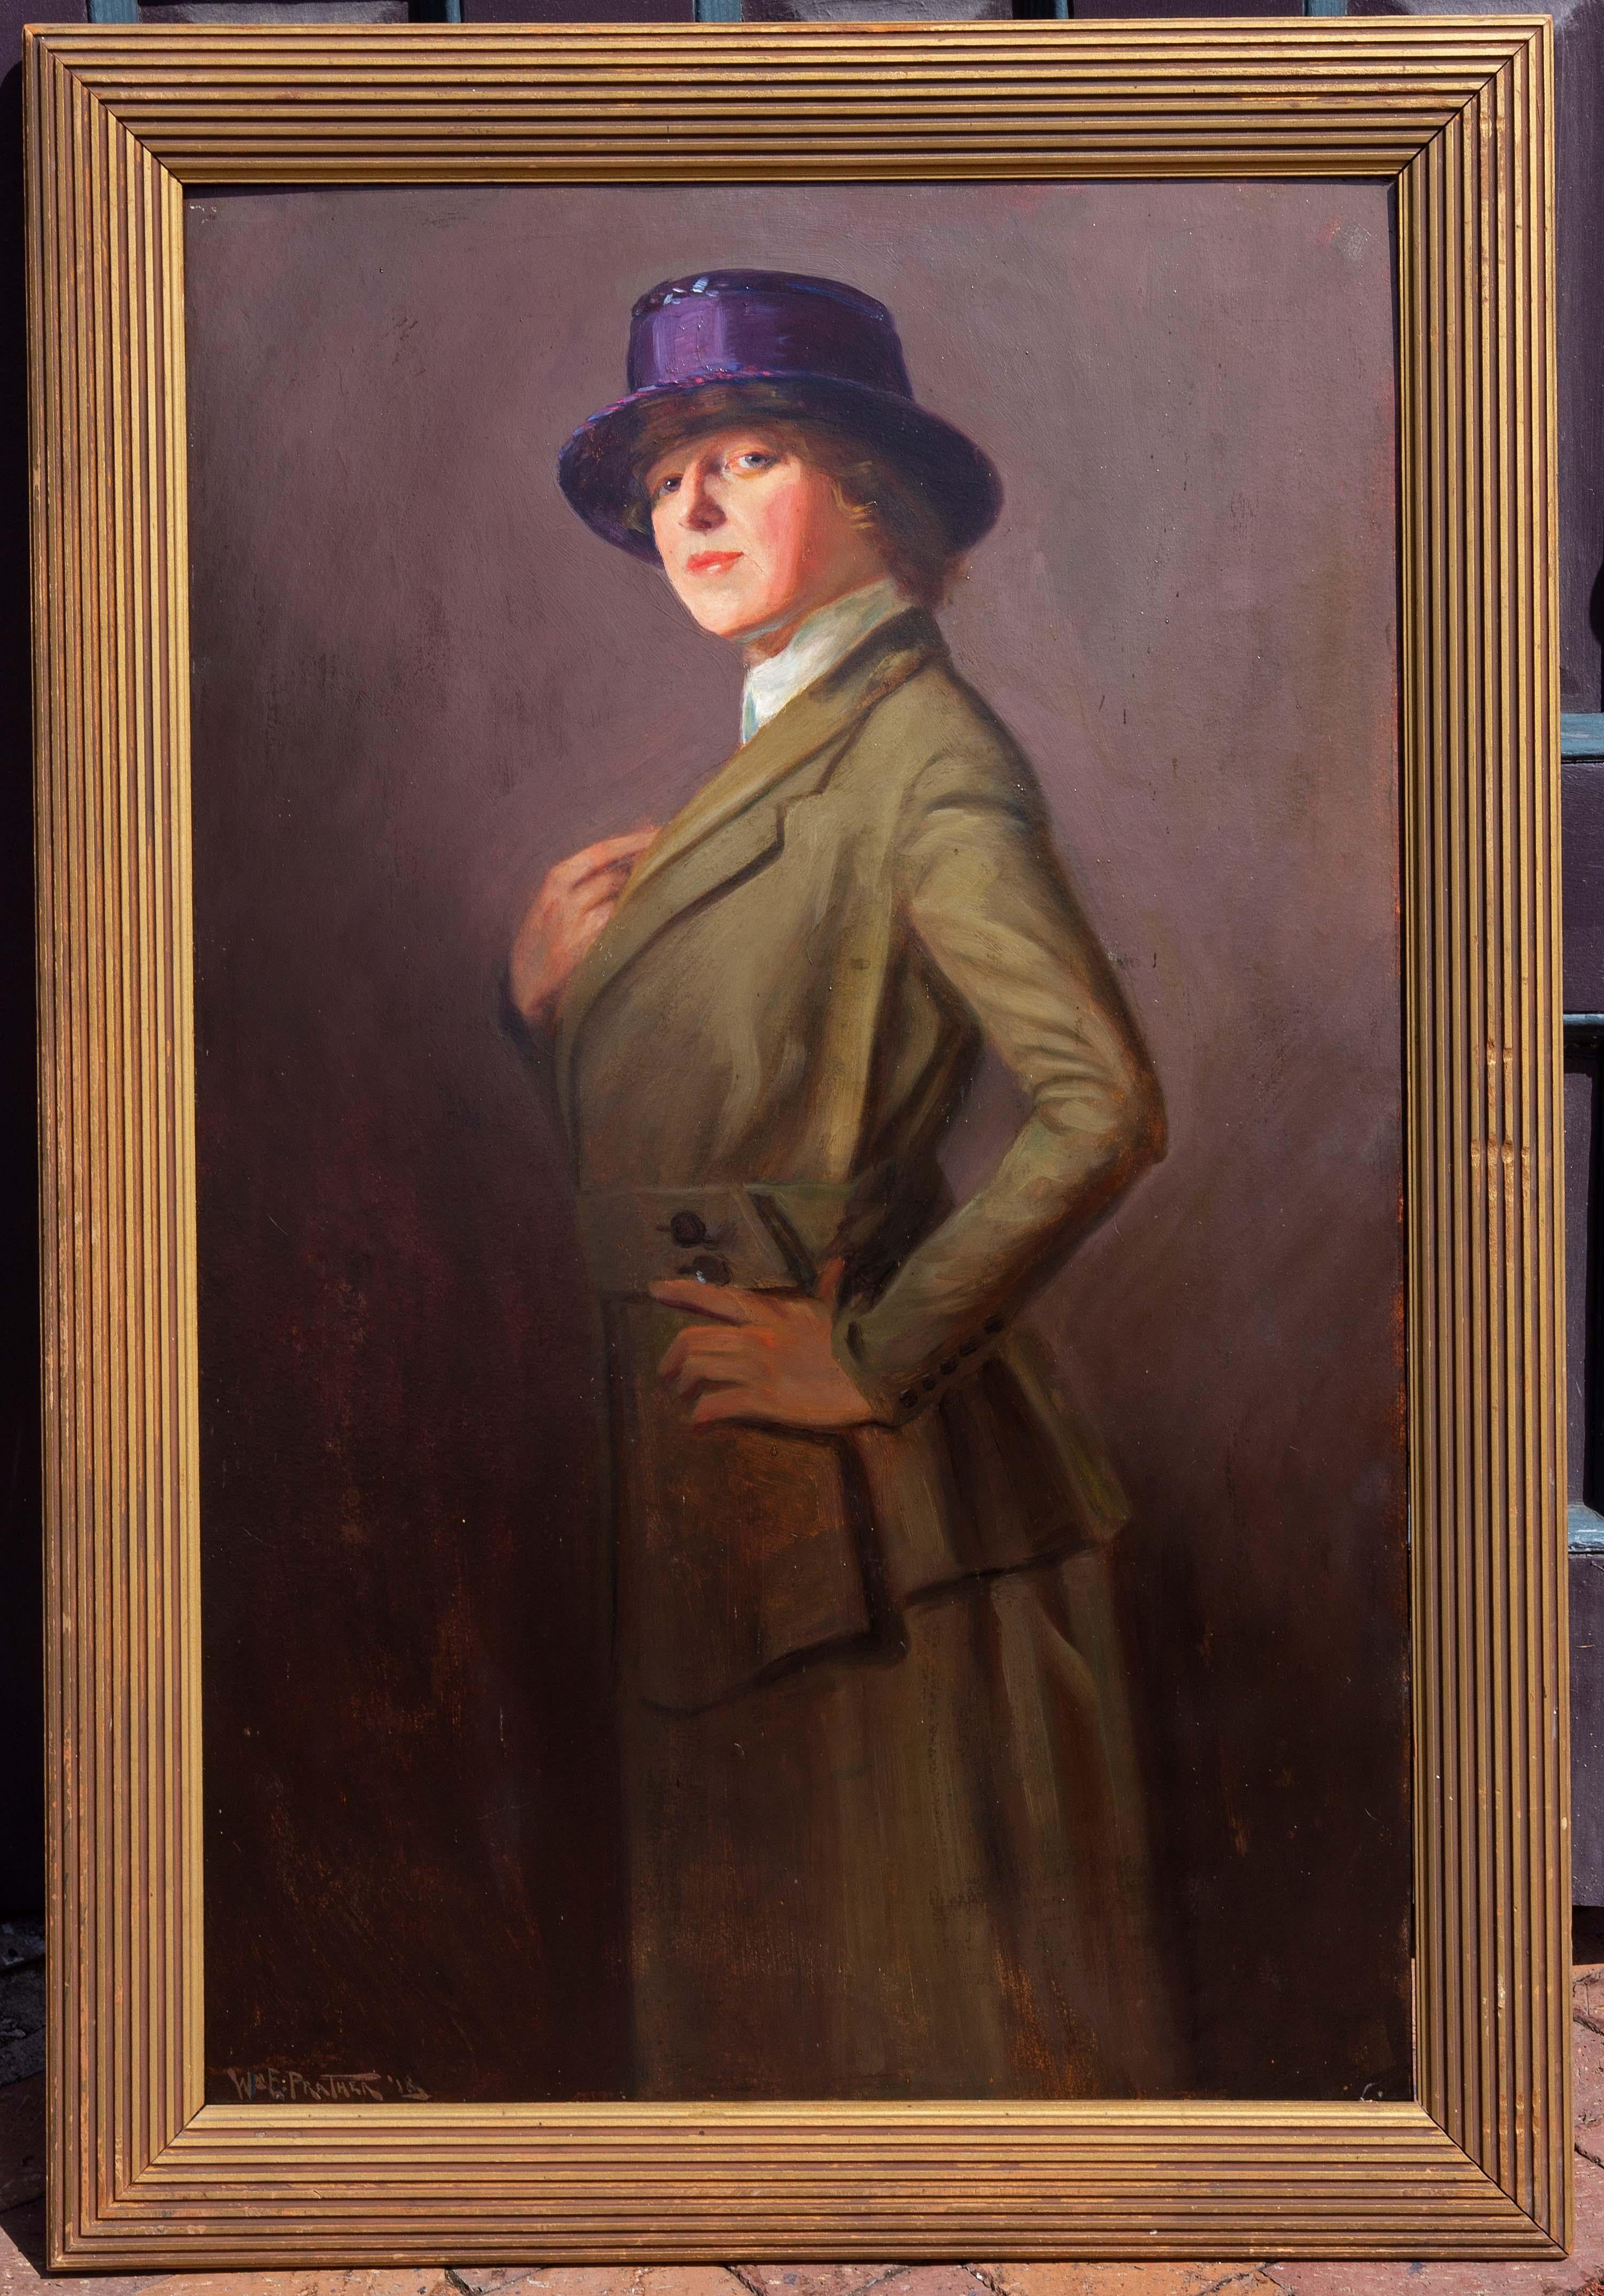 Bold portrait of a woman in riding clothes. Oil on board by American painter William E. Prather. Signed and dated 1918. In the original Whistler style frame. Please, contact us for shipping options.

Biography from the Archives of askART

This